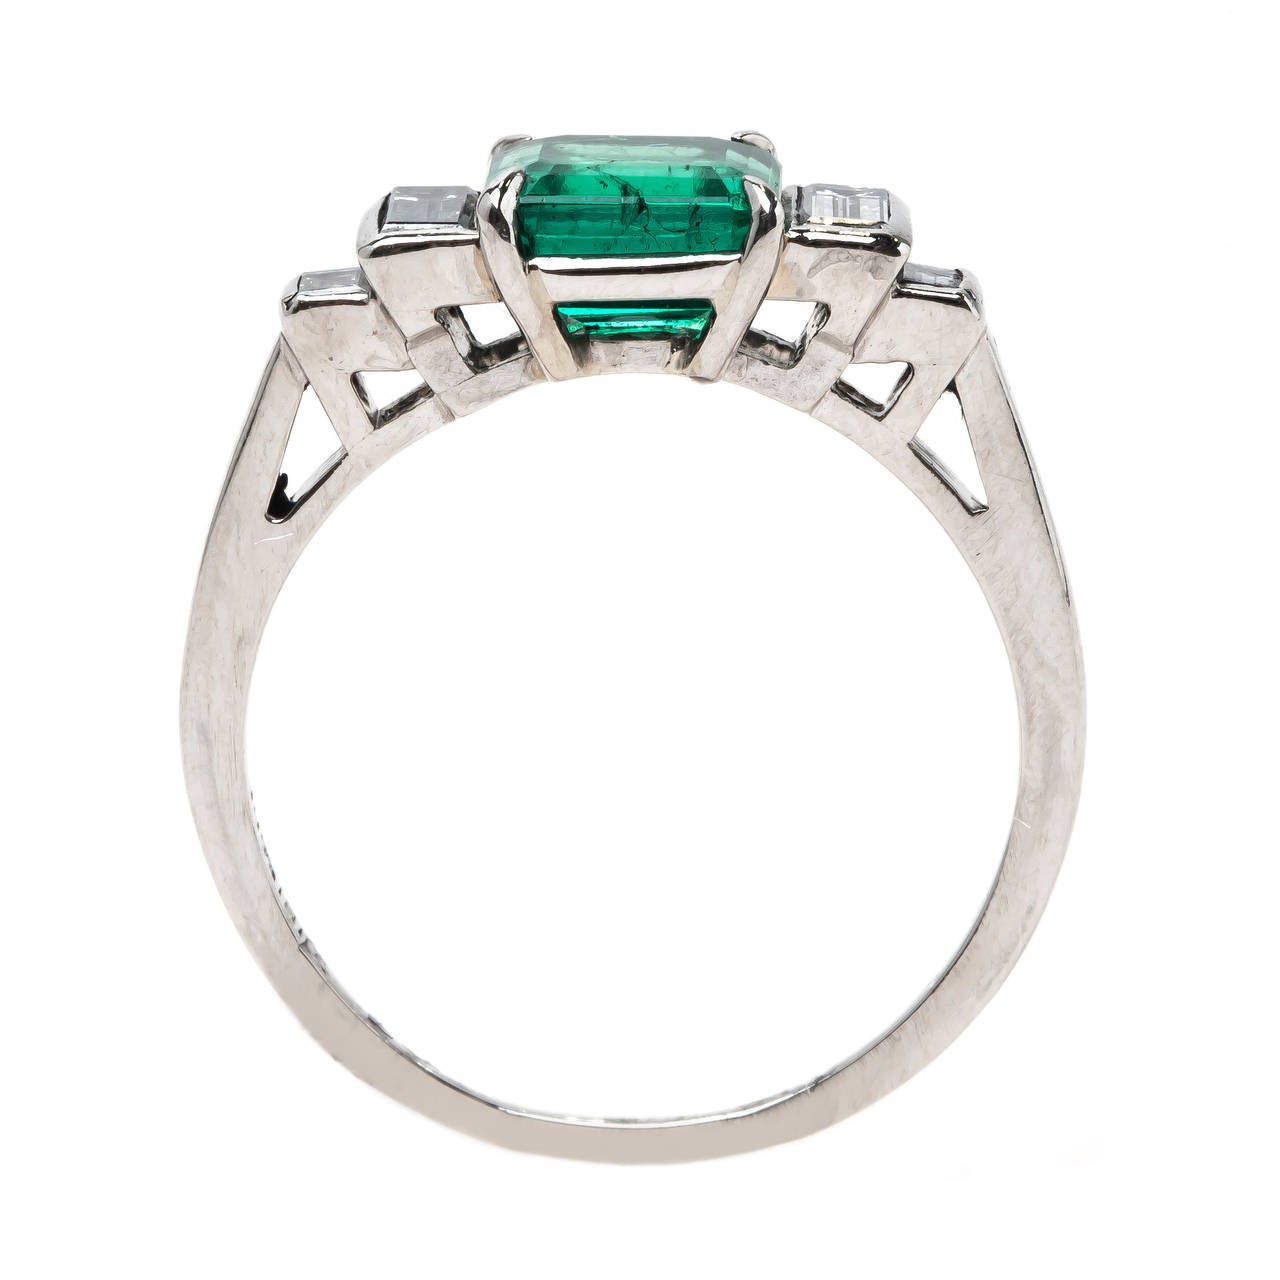 McKinney is a classic authentic Mid-Century (circa 1950) platinum-set emerald and diamond engagement ring featuring an unbelievable 1.08ct Step-Cut square emerald. This majestic emerald is accompanied by a Guild Laboratory certificate stating that